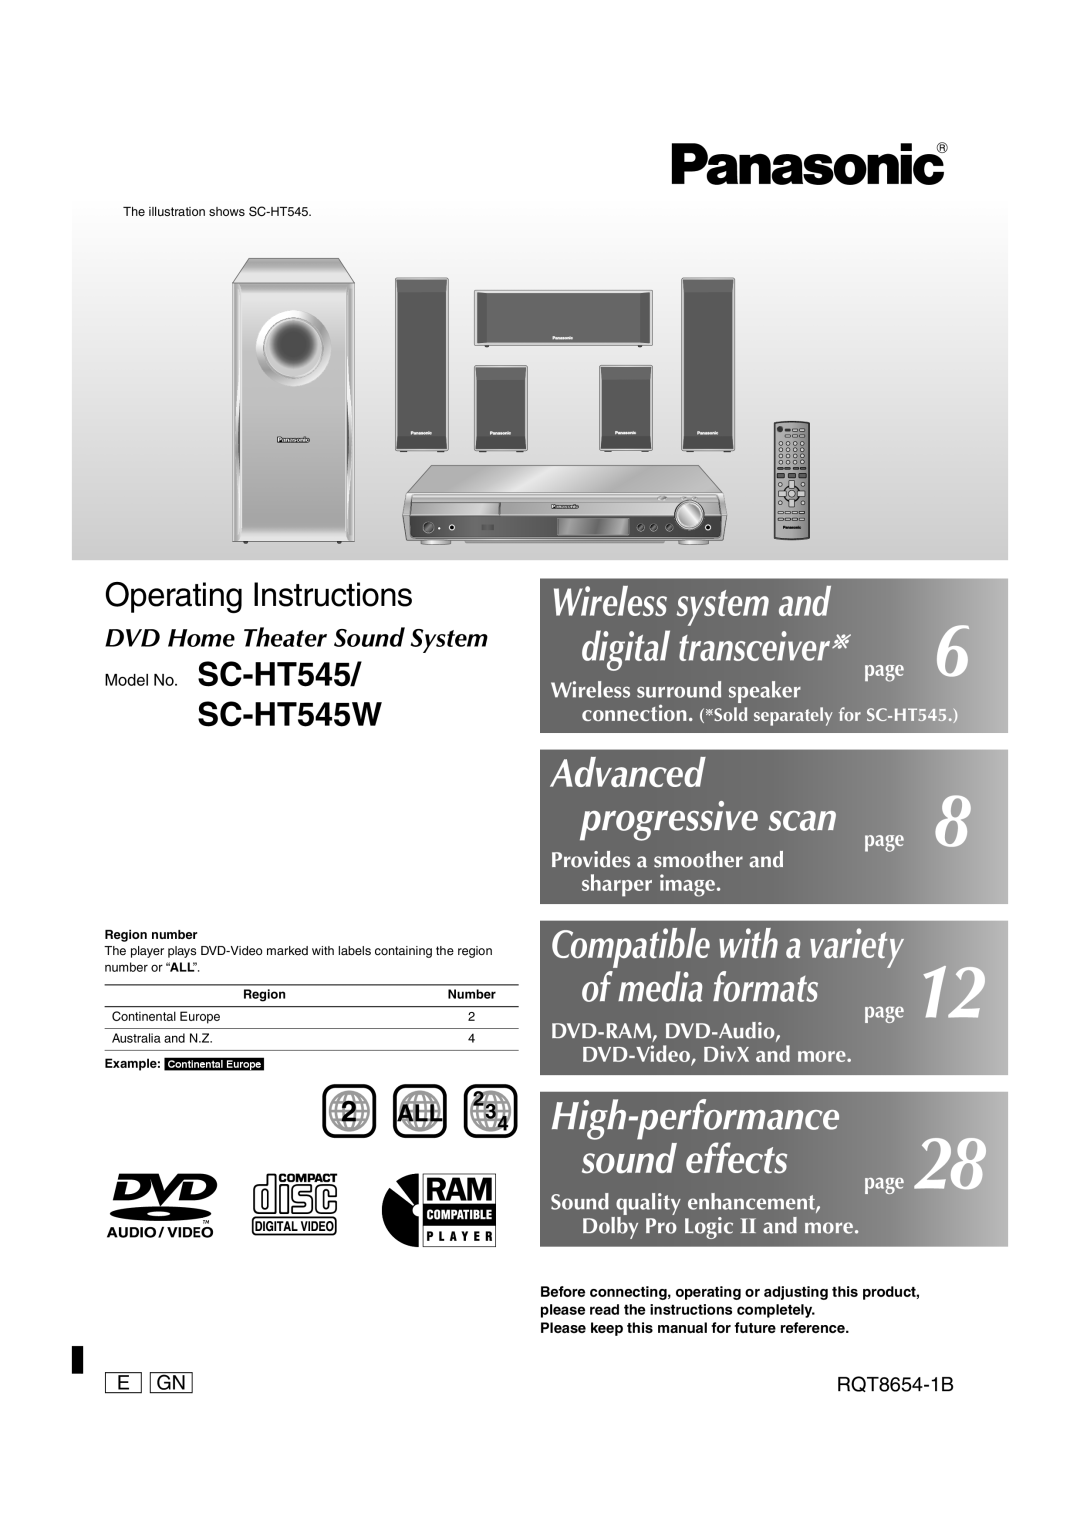 Panasonic SC-HT545W manual DVD Home Theater Sound System, Wireless system and, Advanced, of media formats, 2 ALL, E Gn 